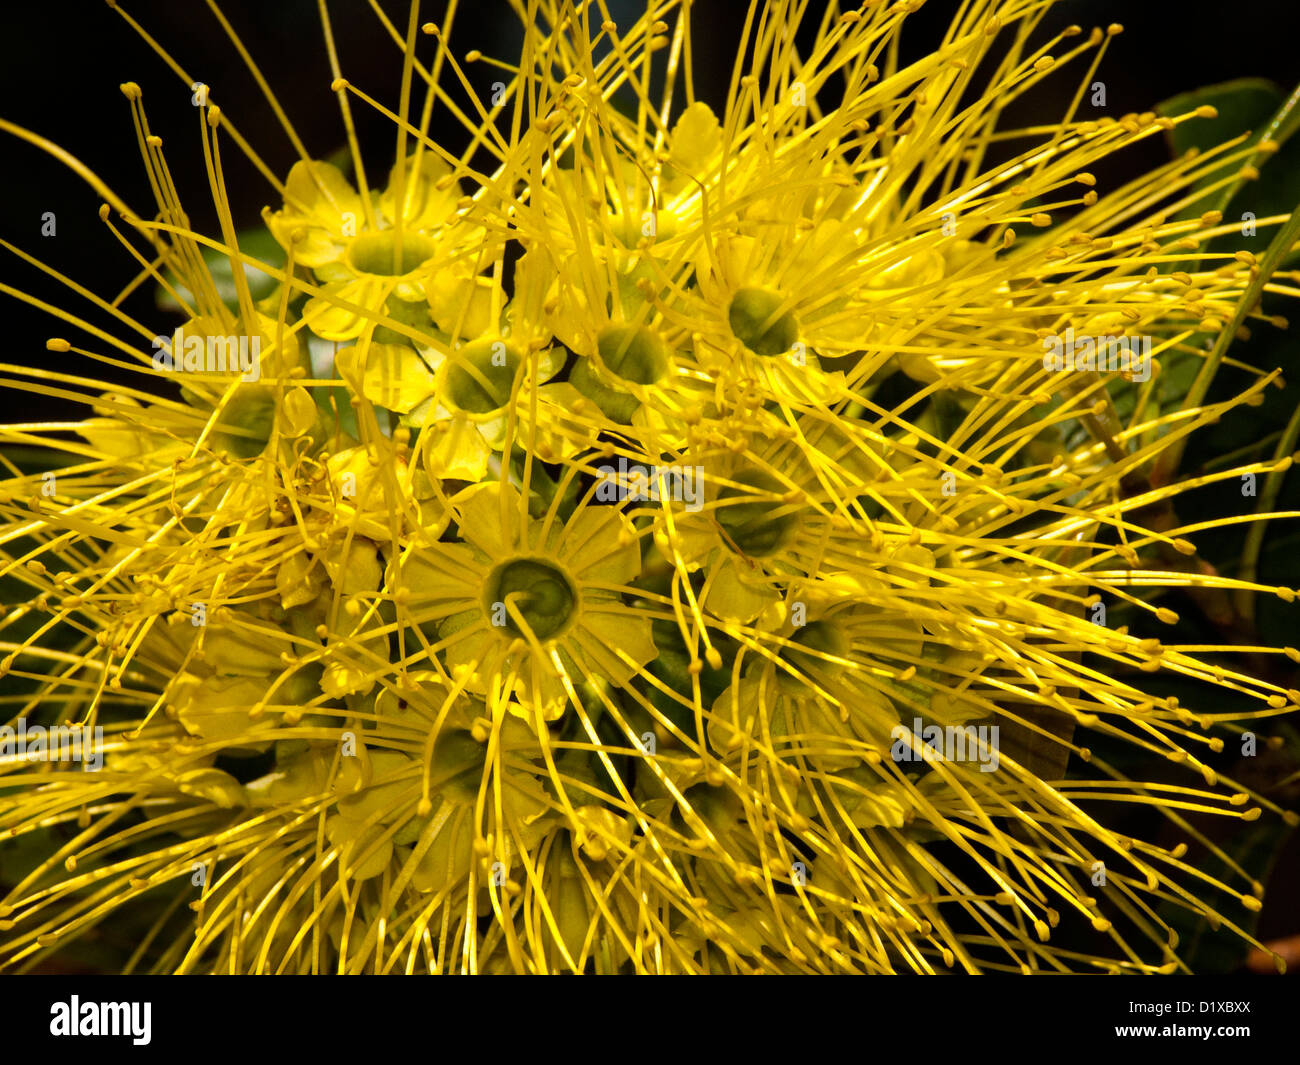 Cluster of yellow flowers of Xanthostemon chrysanthus - an Australian native tree species Stock Photo